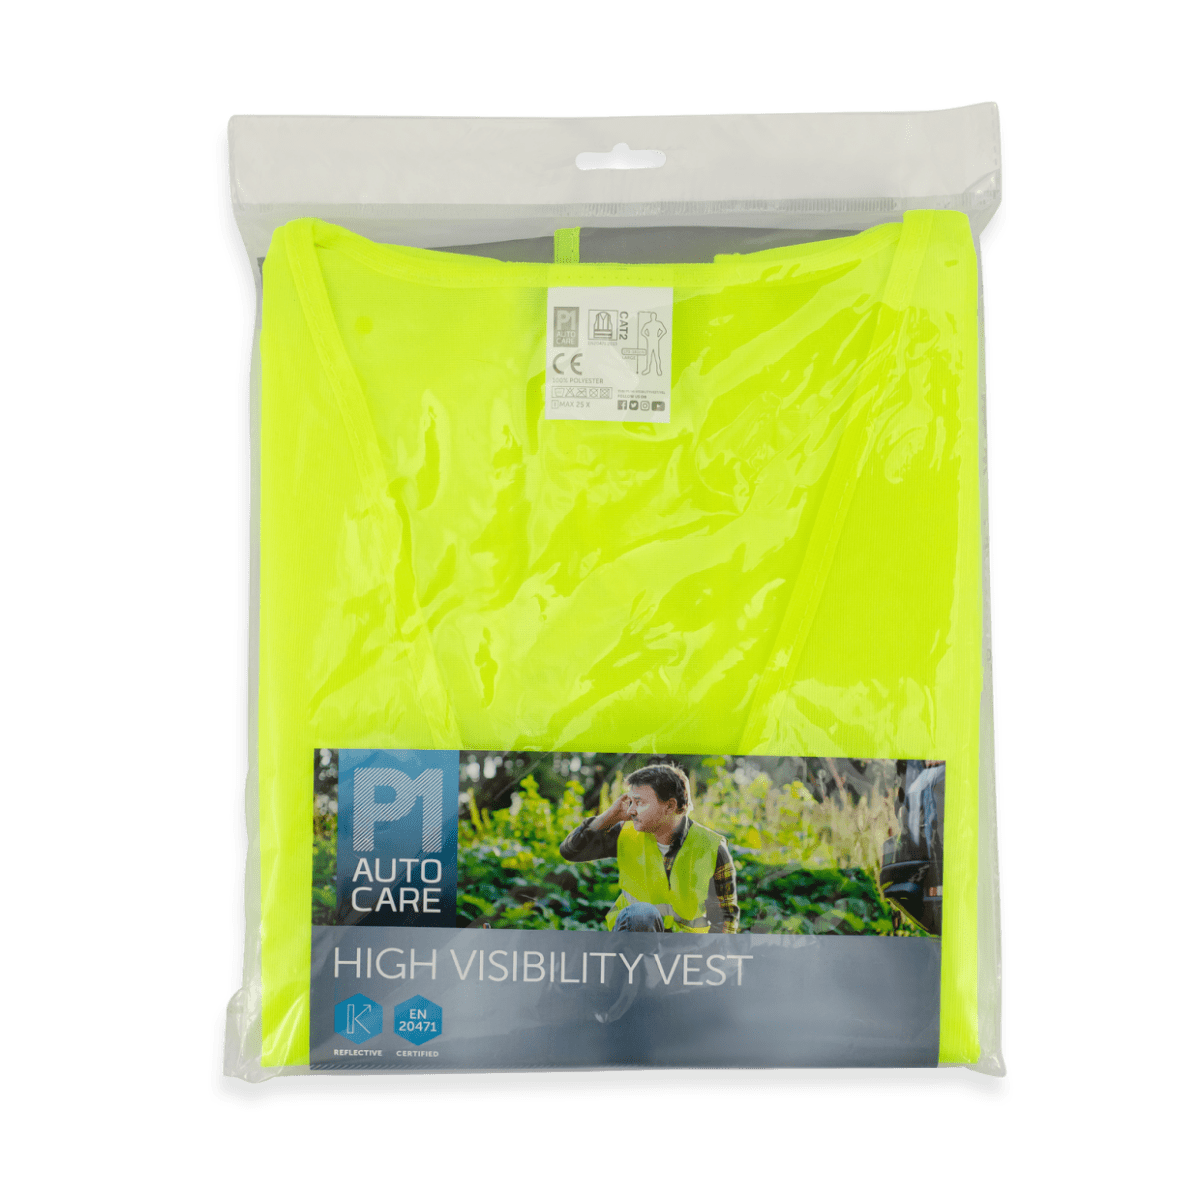 High-Visibility Safety Vest – Reflective, Adjustable & Lightweight for Construction, Traffic, and Outdoor Activities - Green Flag Shop